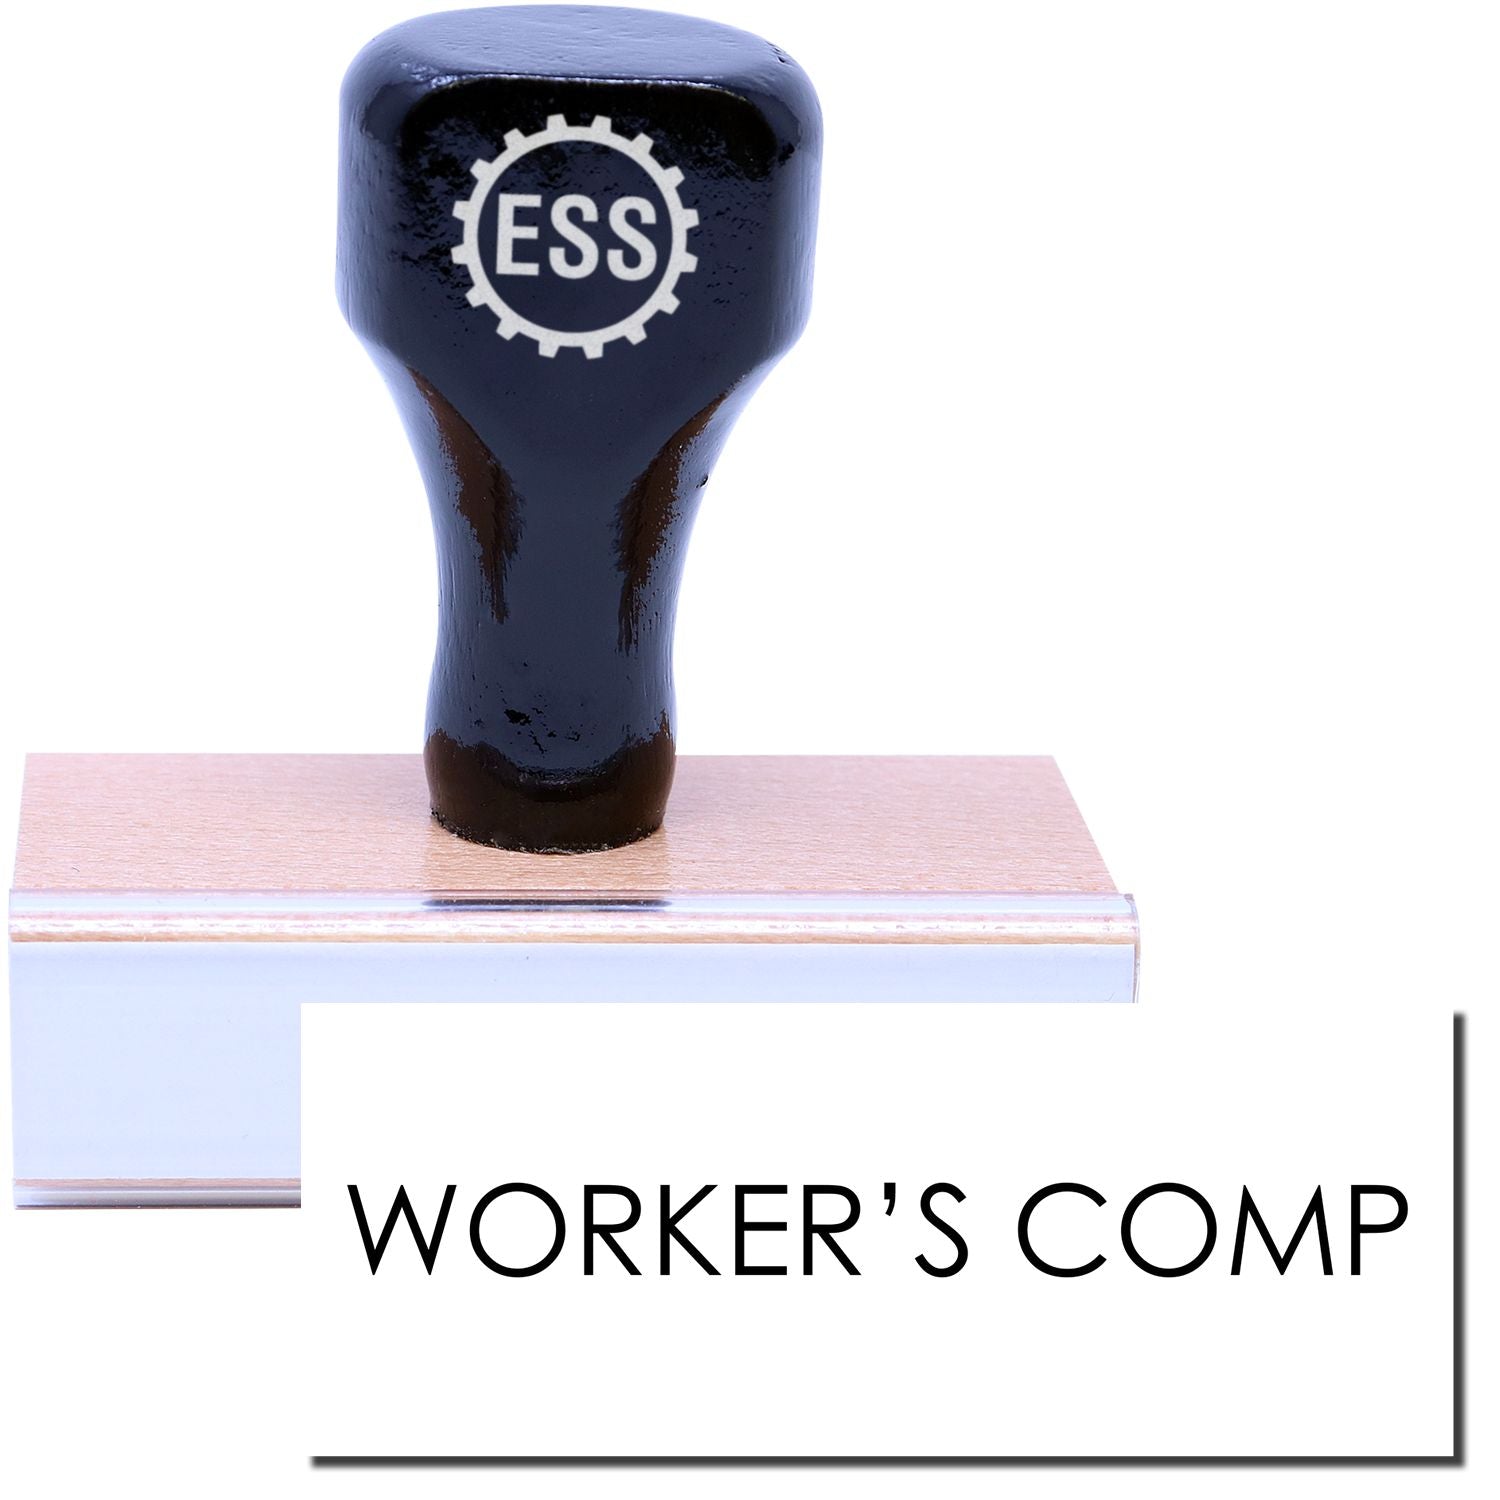 A stock office rubber stamp with a stamped image showing how the text "WORKER'S COMP" in a large font is displayed after stamping.